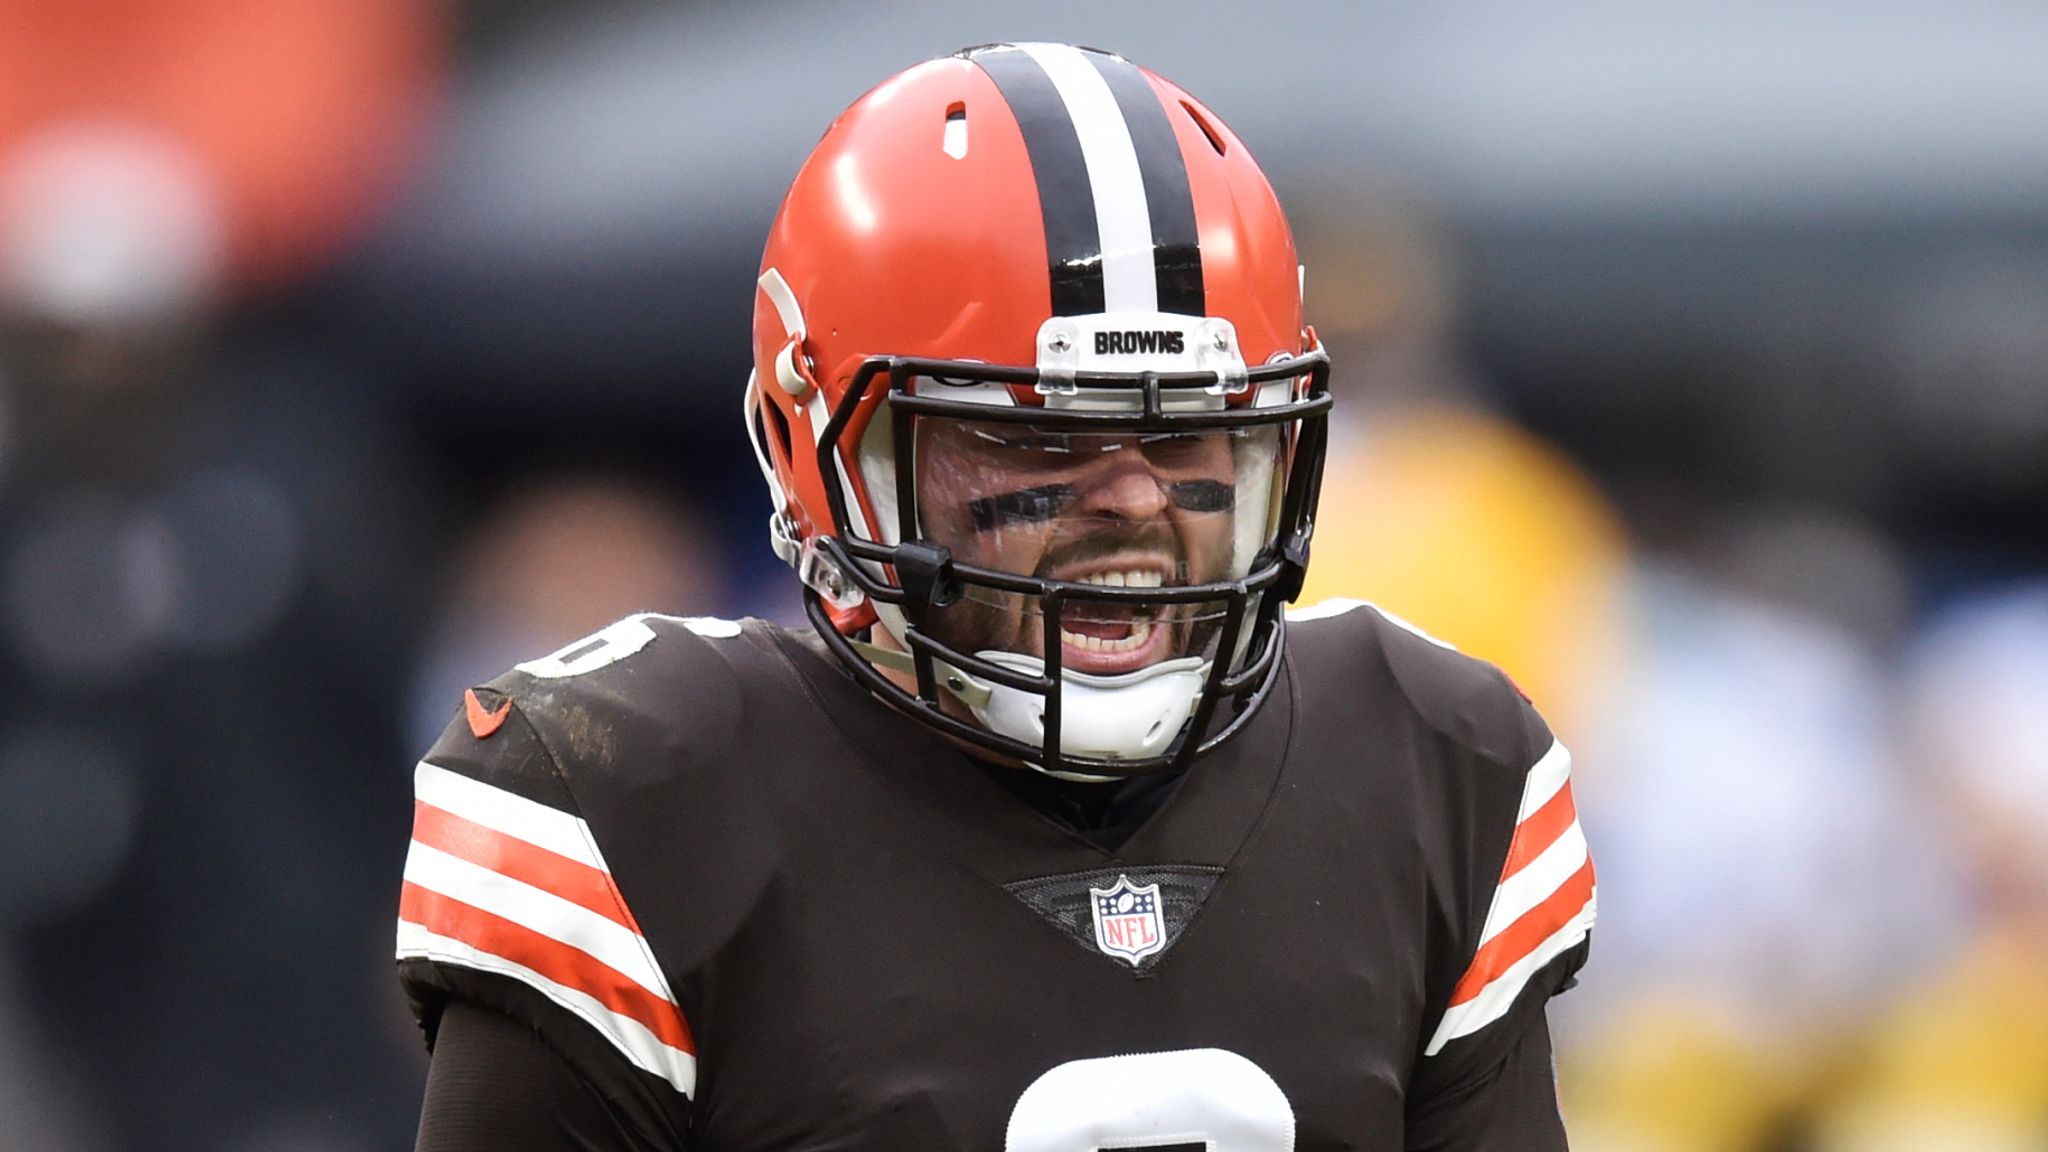 Browns end long playoff drought, survive late Steelers rally